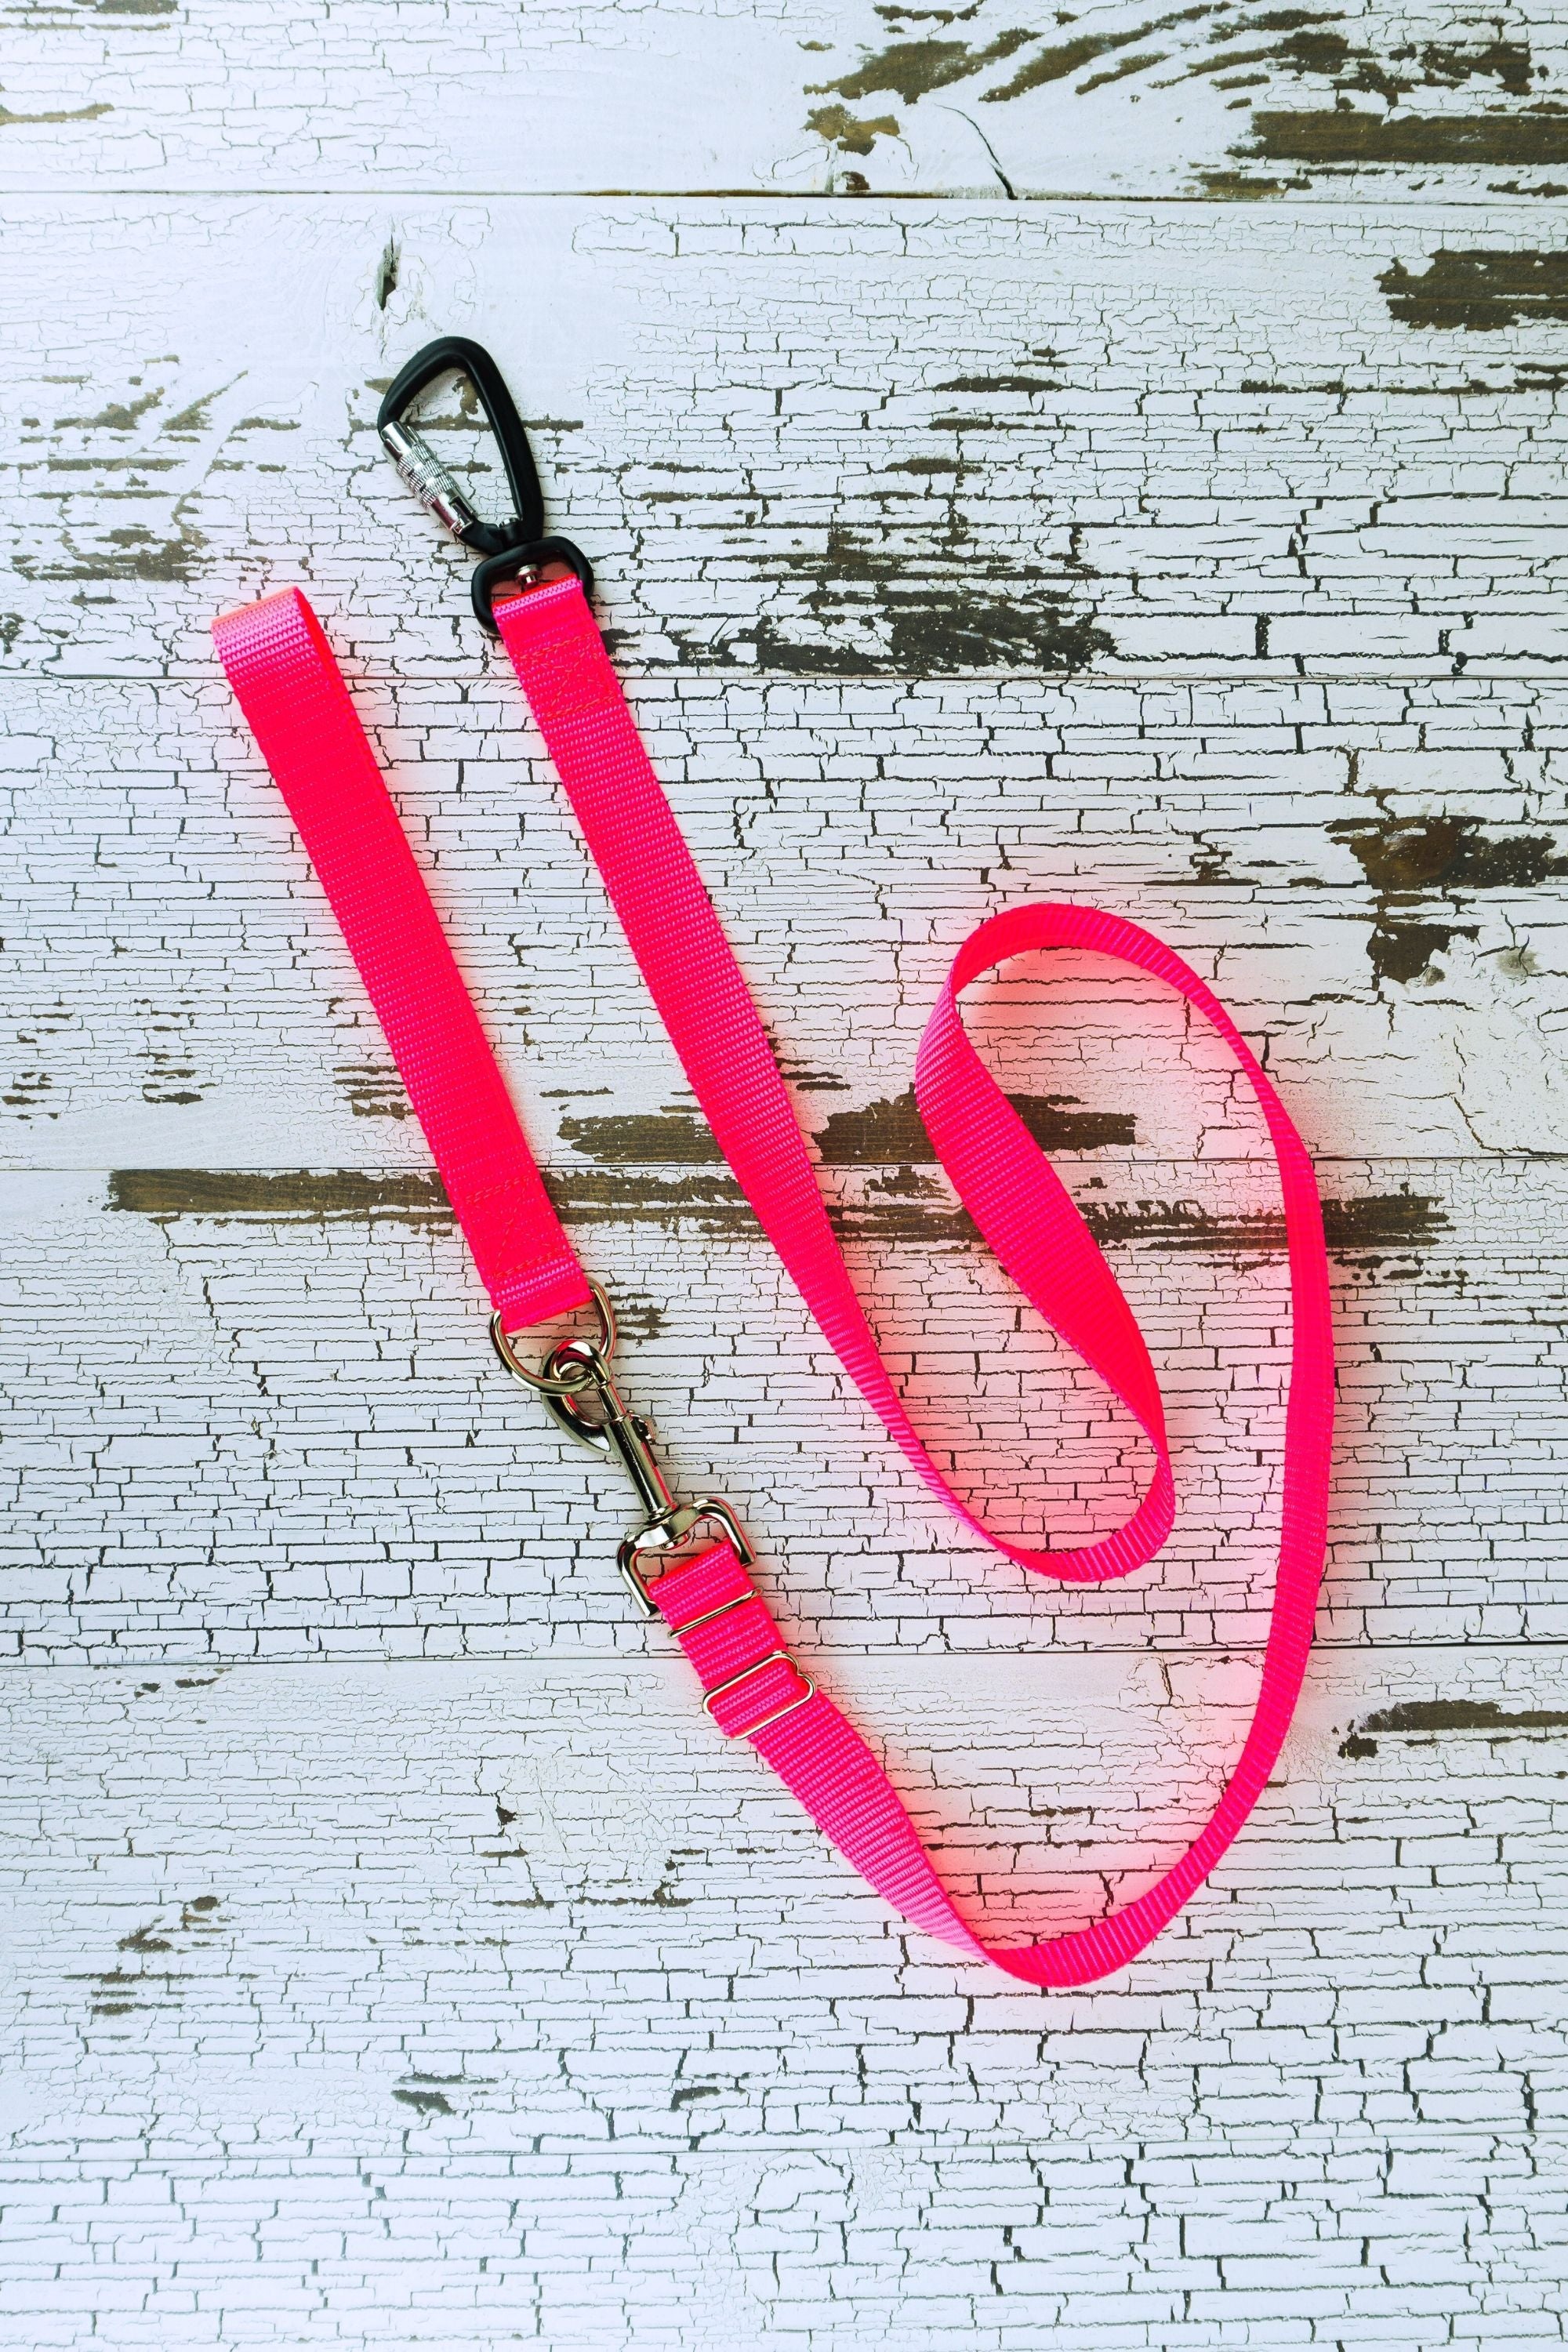 Neon pink adjustable length hands free leash shown here converted to a handheld leash by adding a leash handle with a d ring.